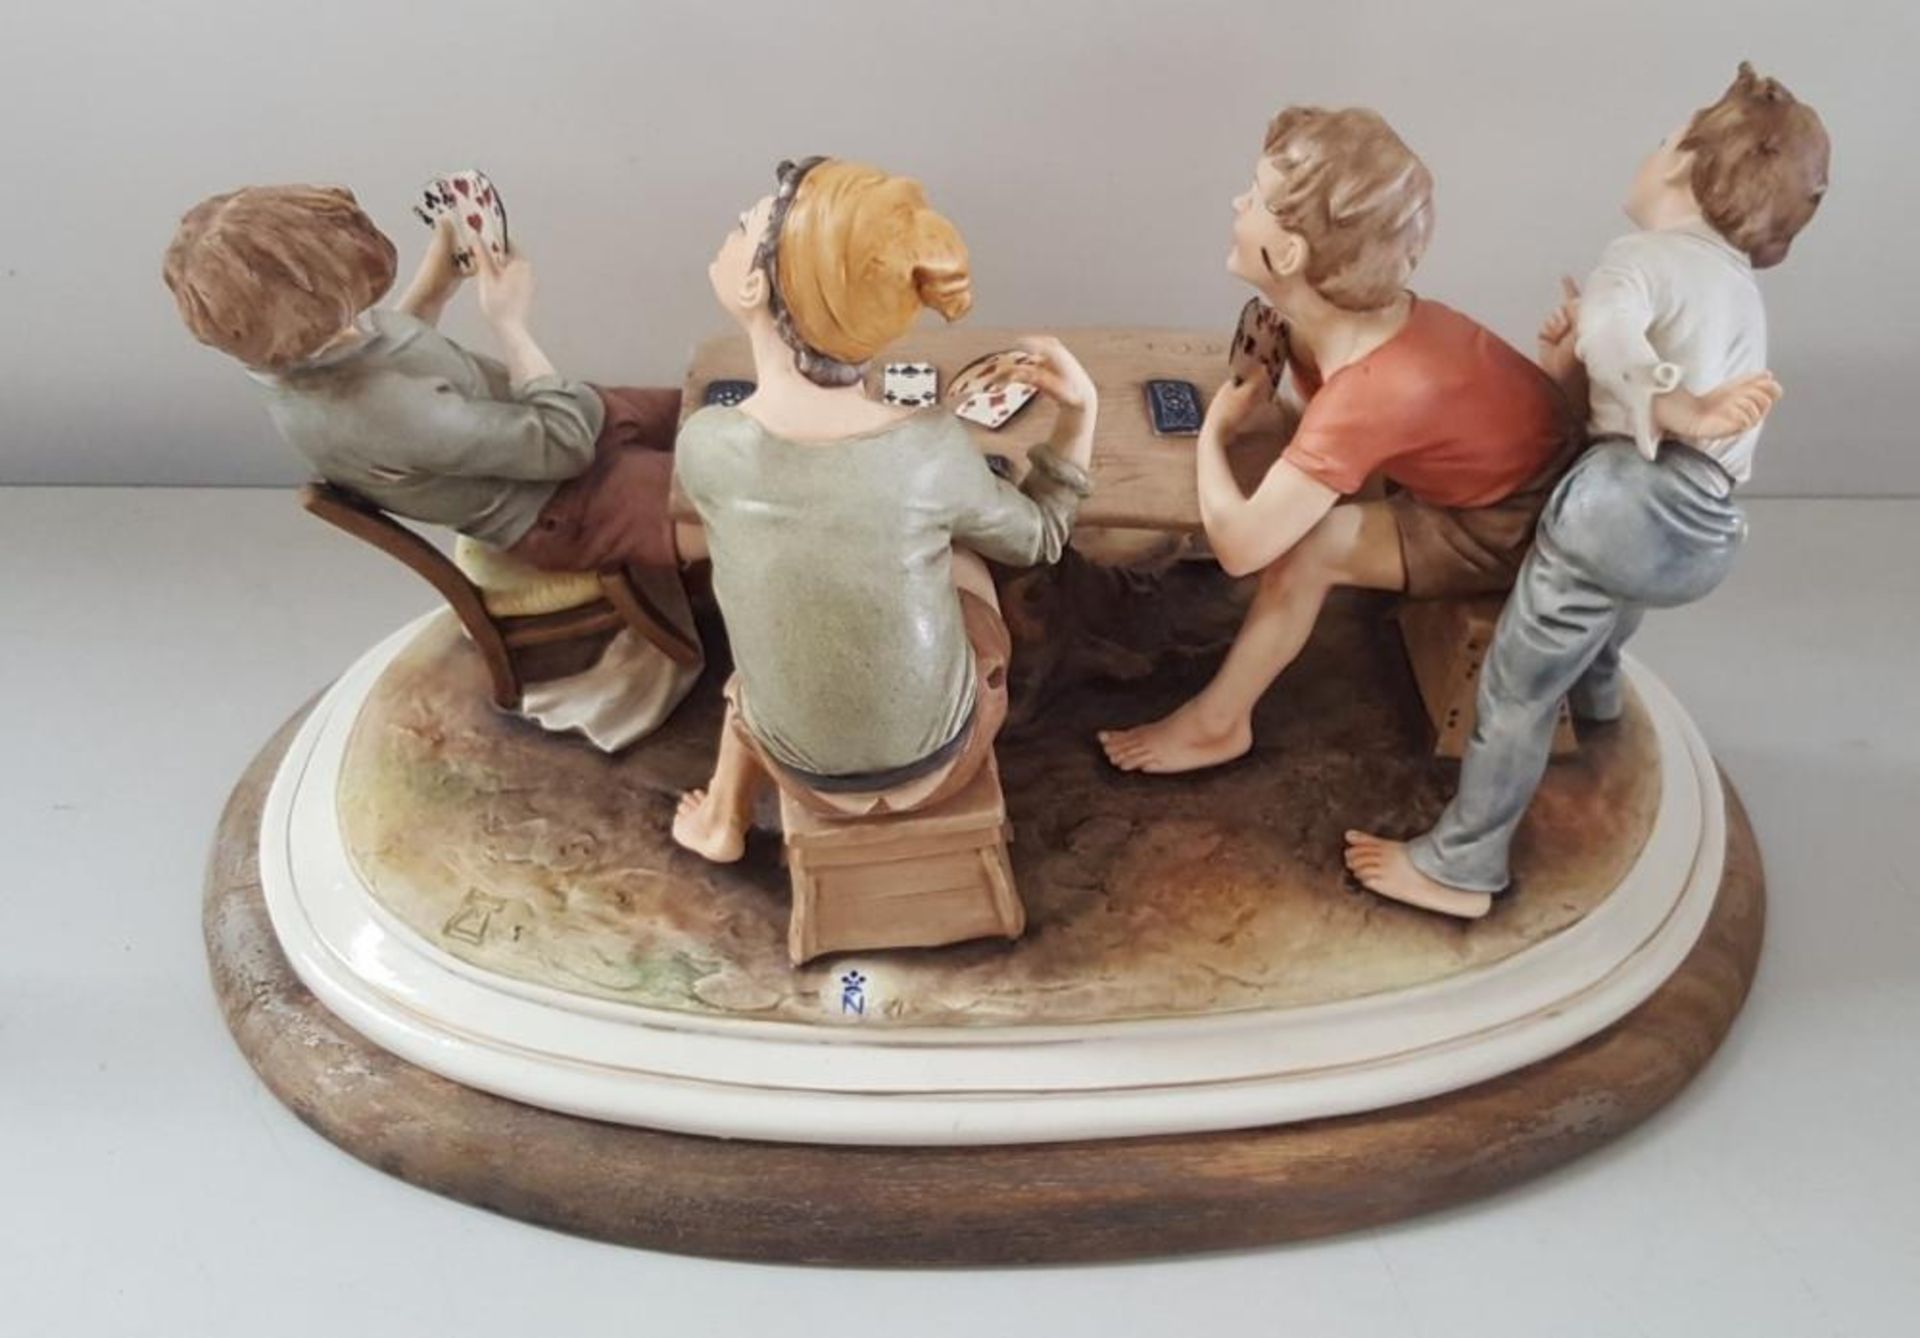 1 x VINTAGE ITALIAN CAPODIMONTE PORCELAIN GROUP "THE CHEATS" BY BRUNO MERLI - Ref CQ346 E - Image 4 of 4